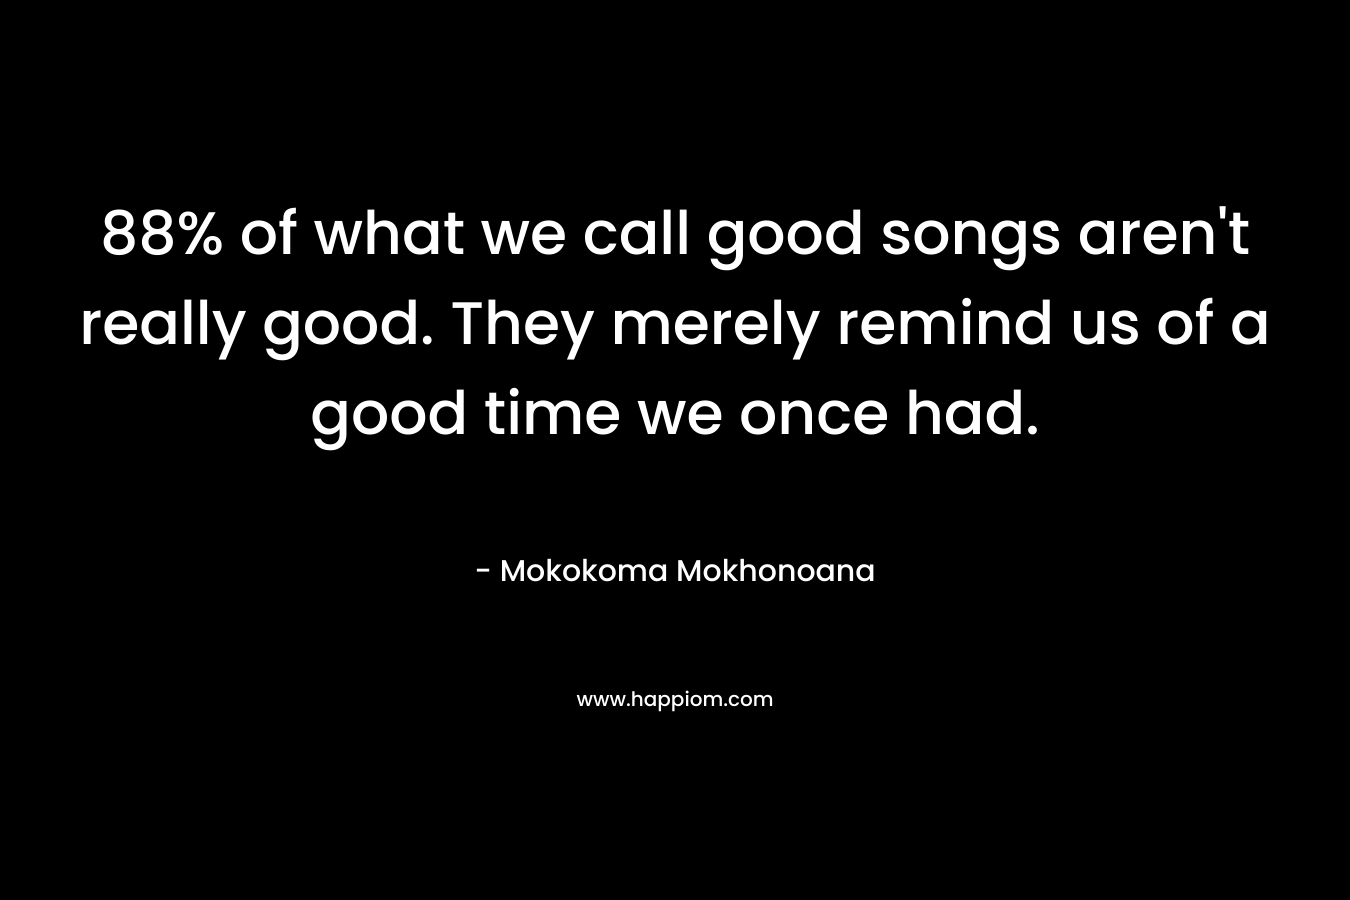 88% of what we call good songs aren’t really good. They merely remind us of a good time we once had. – Mokokoma Mokhonoana